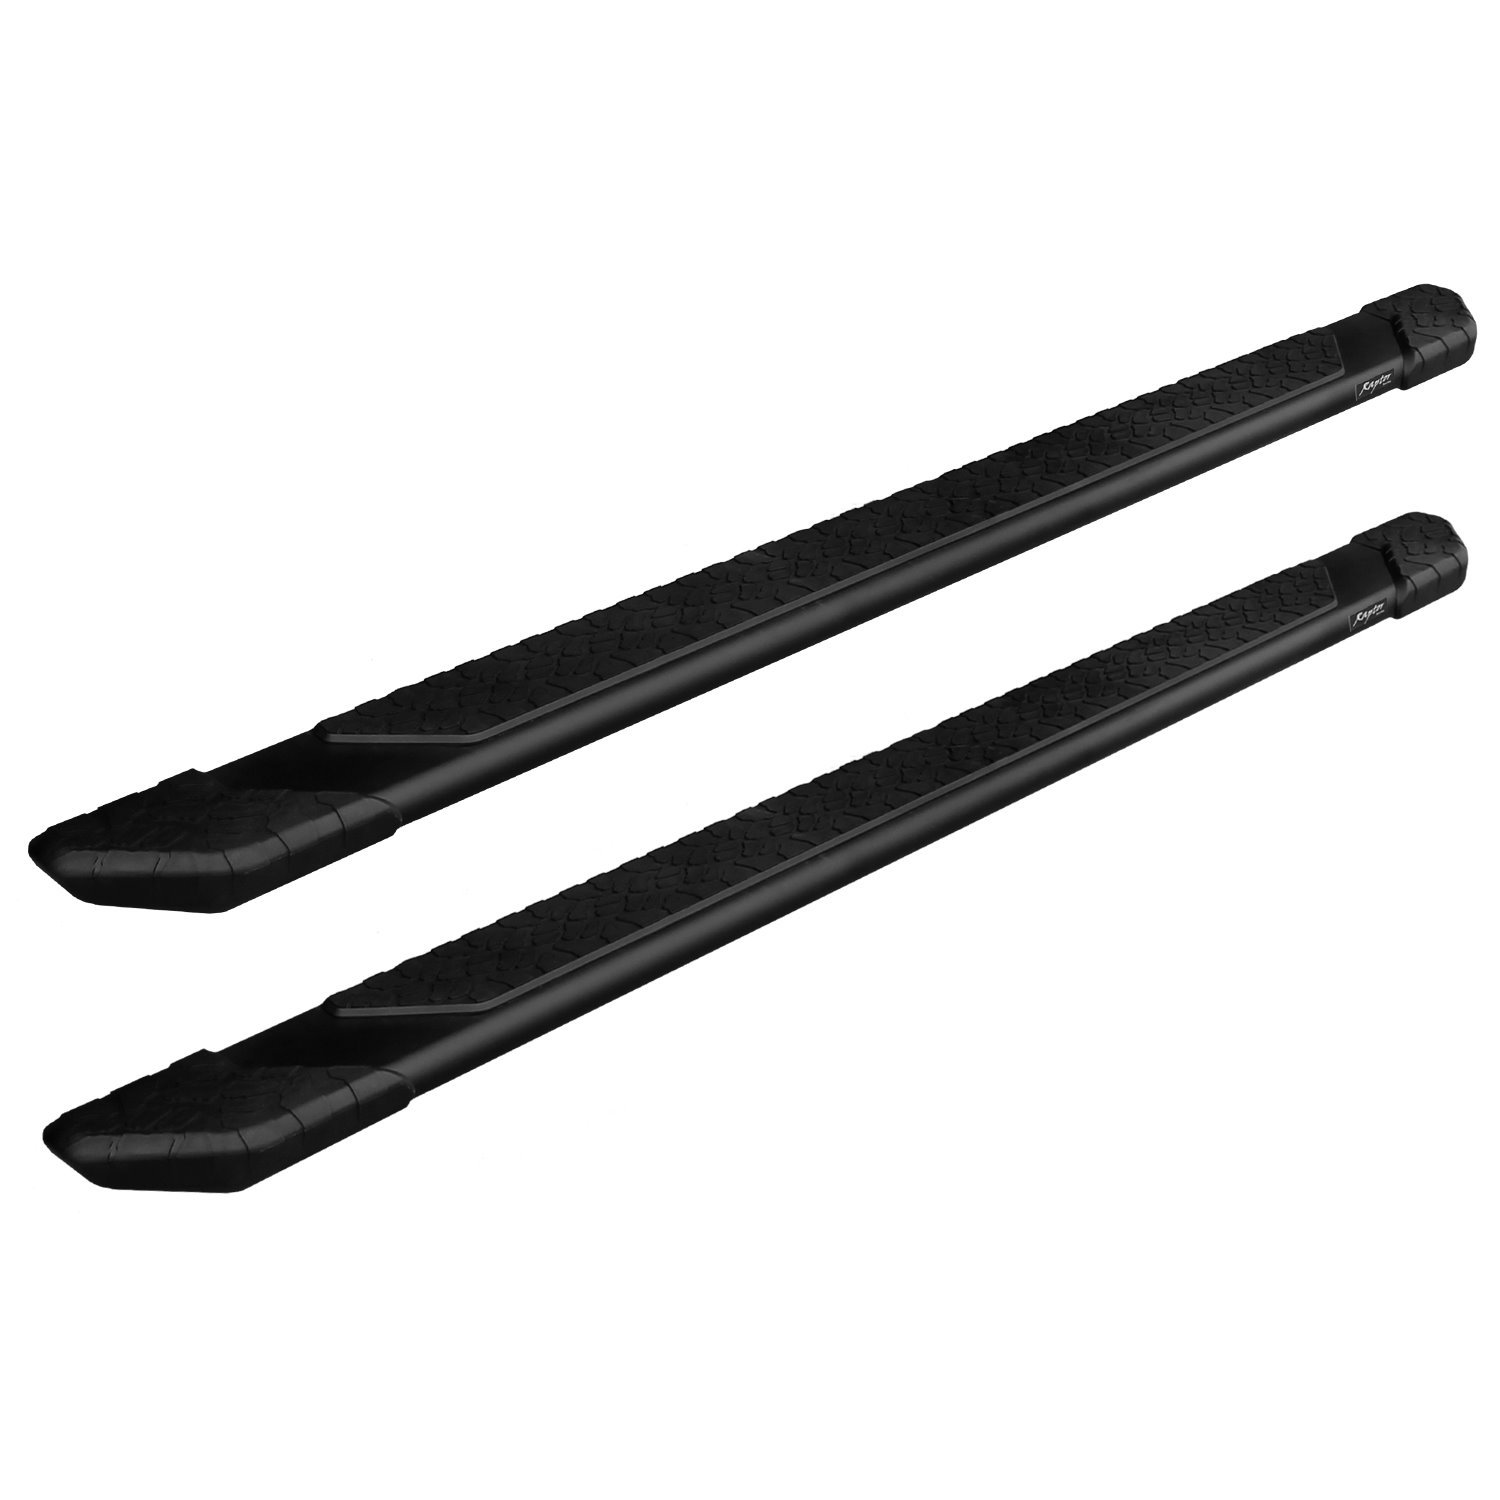 1902-0084BT 5 in Tread Step Slide Track Running Boards, Black Aluminum, Fits Select Dodge Ram 1500 New Body Style Crew Cab